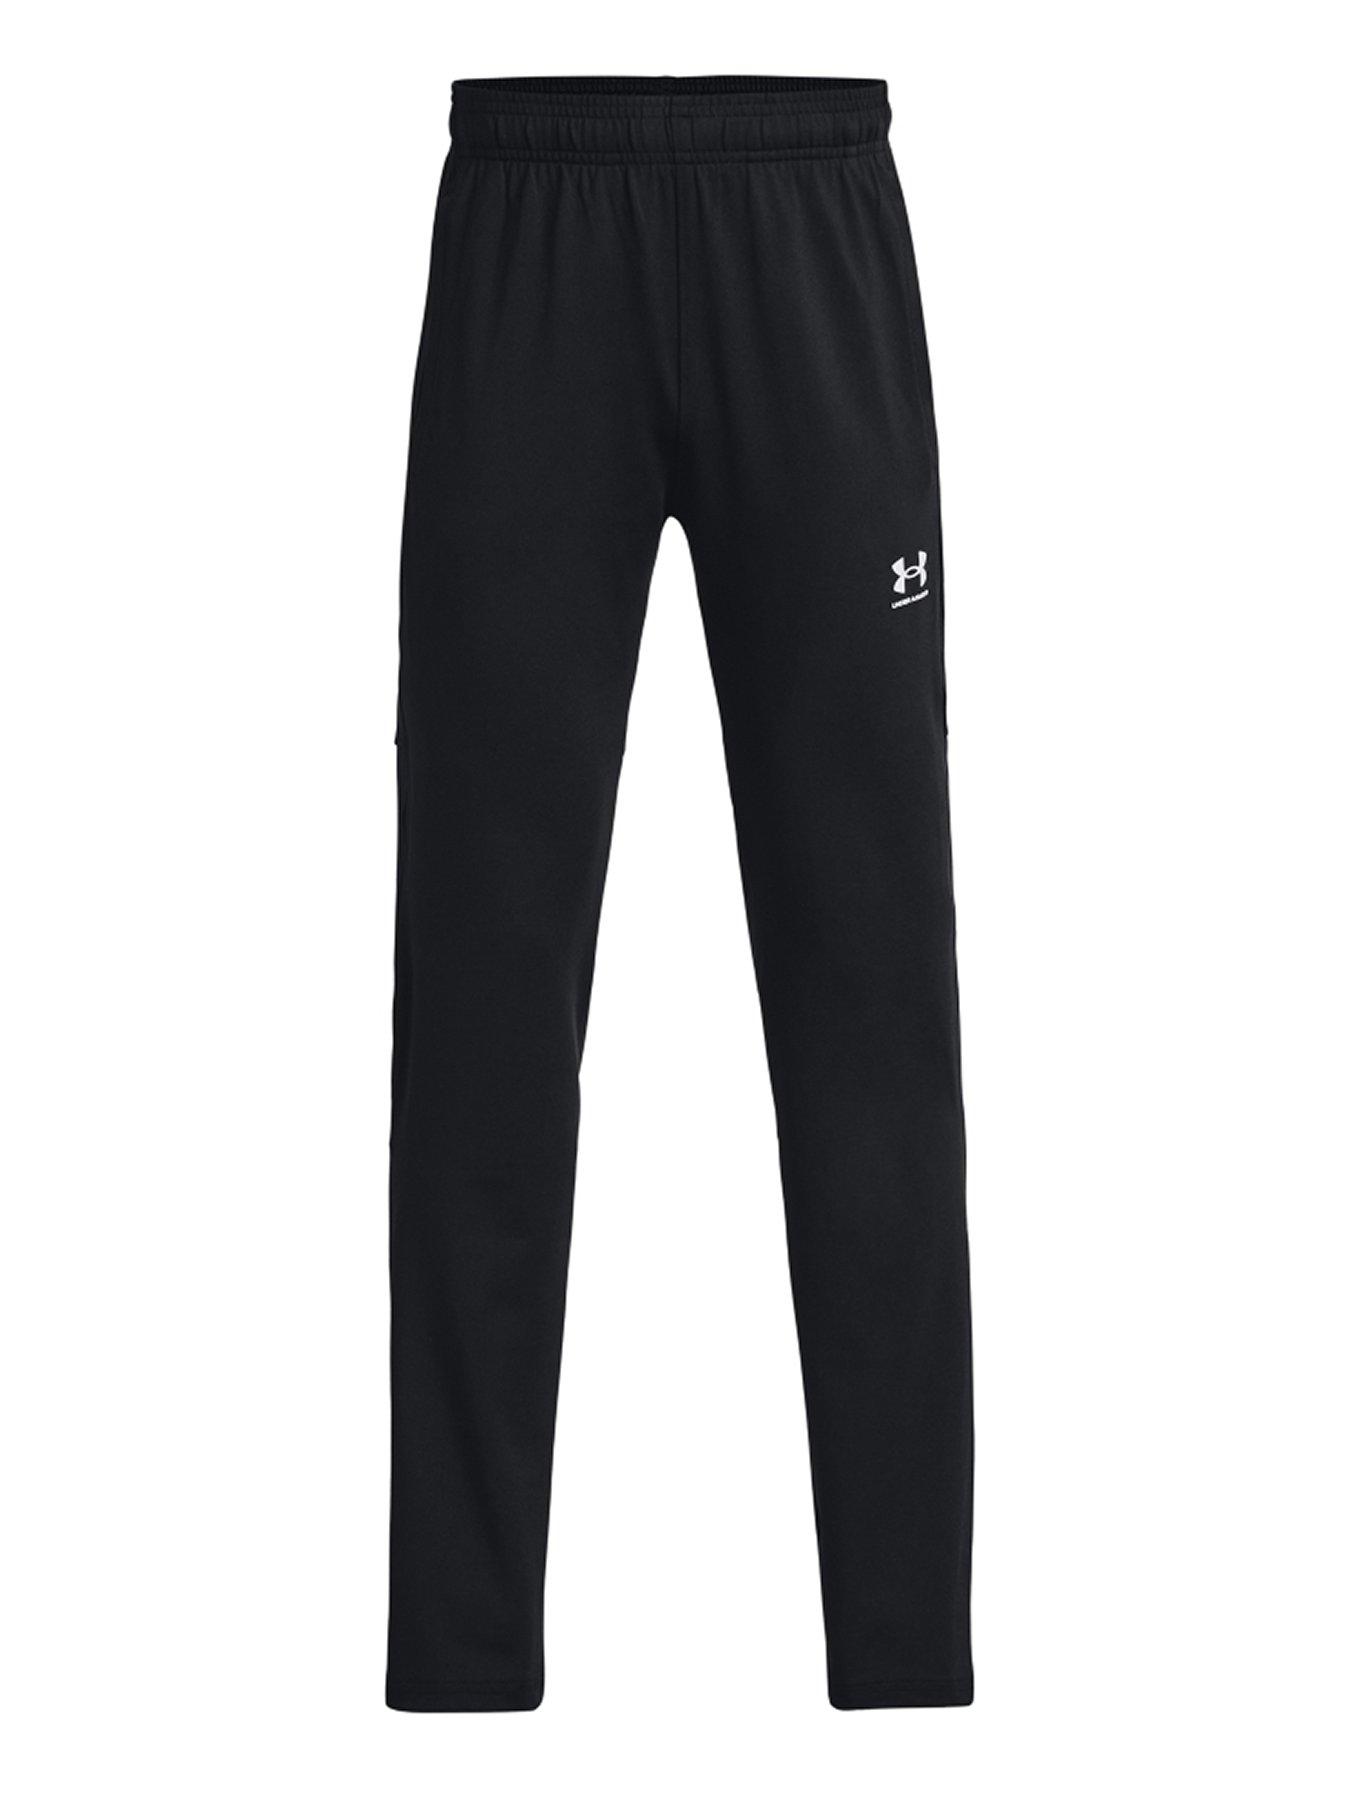 Under Armour Challenger Training Pants Mens